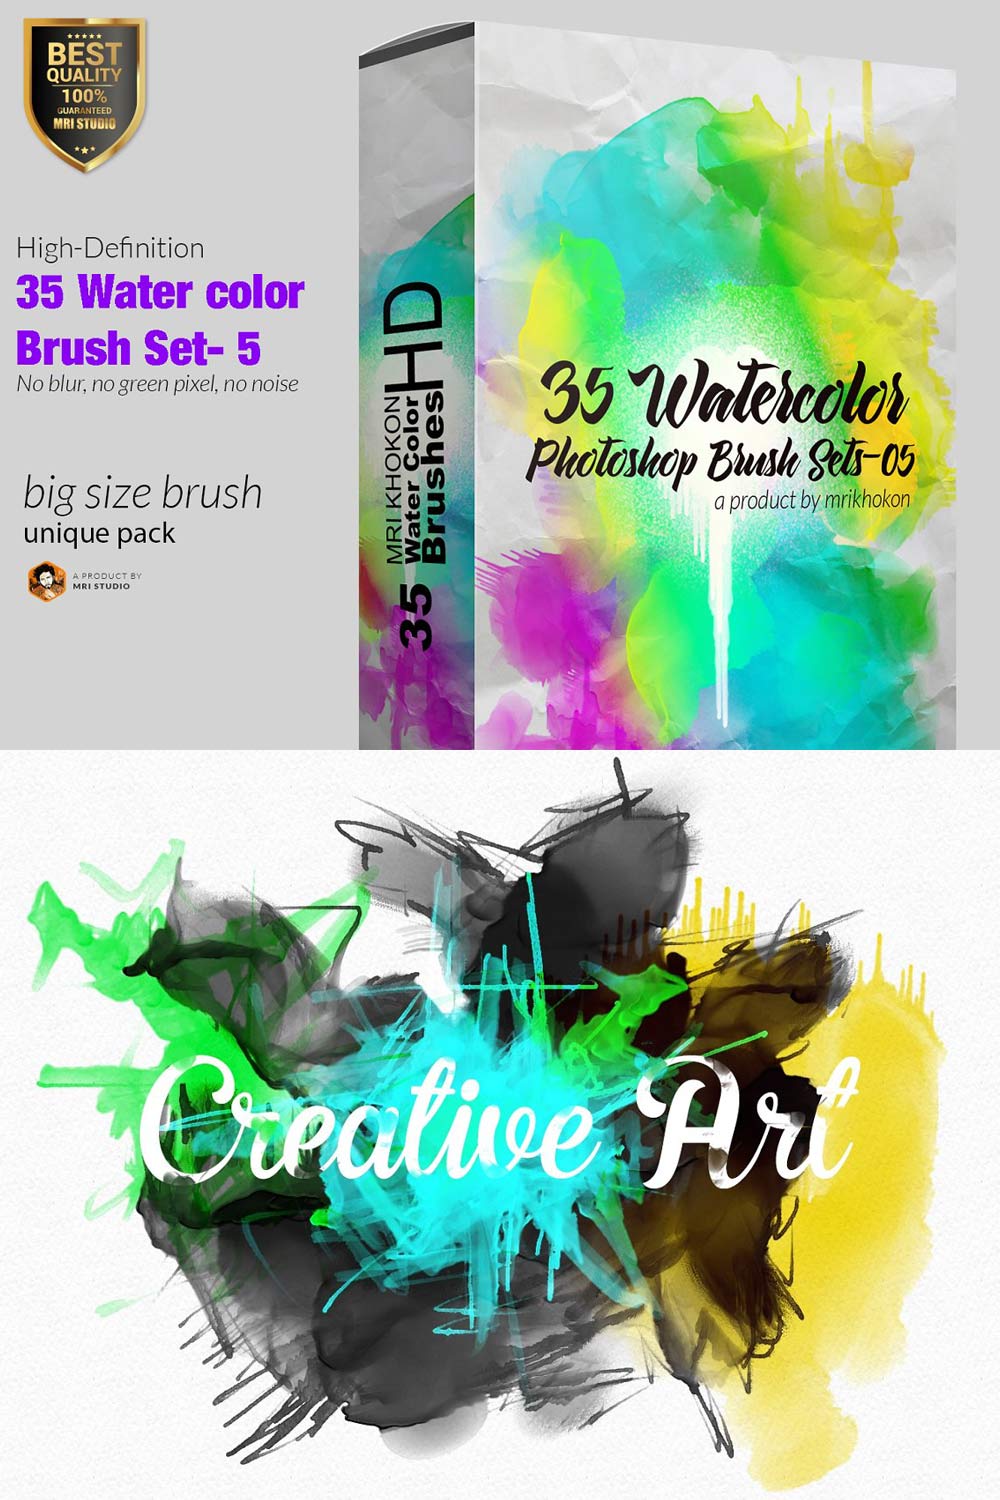 Water color Photoshop Brush Set-5 pinterest preview image.